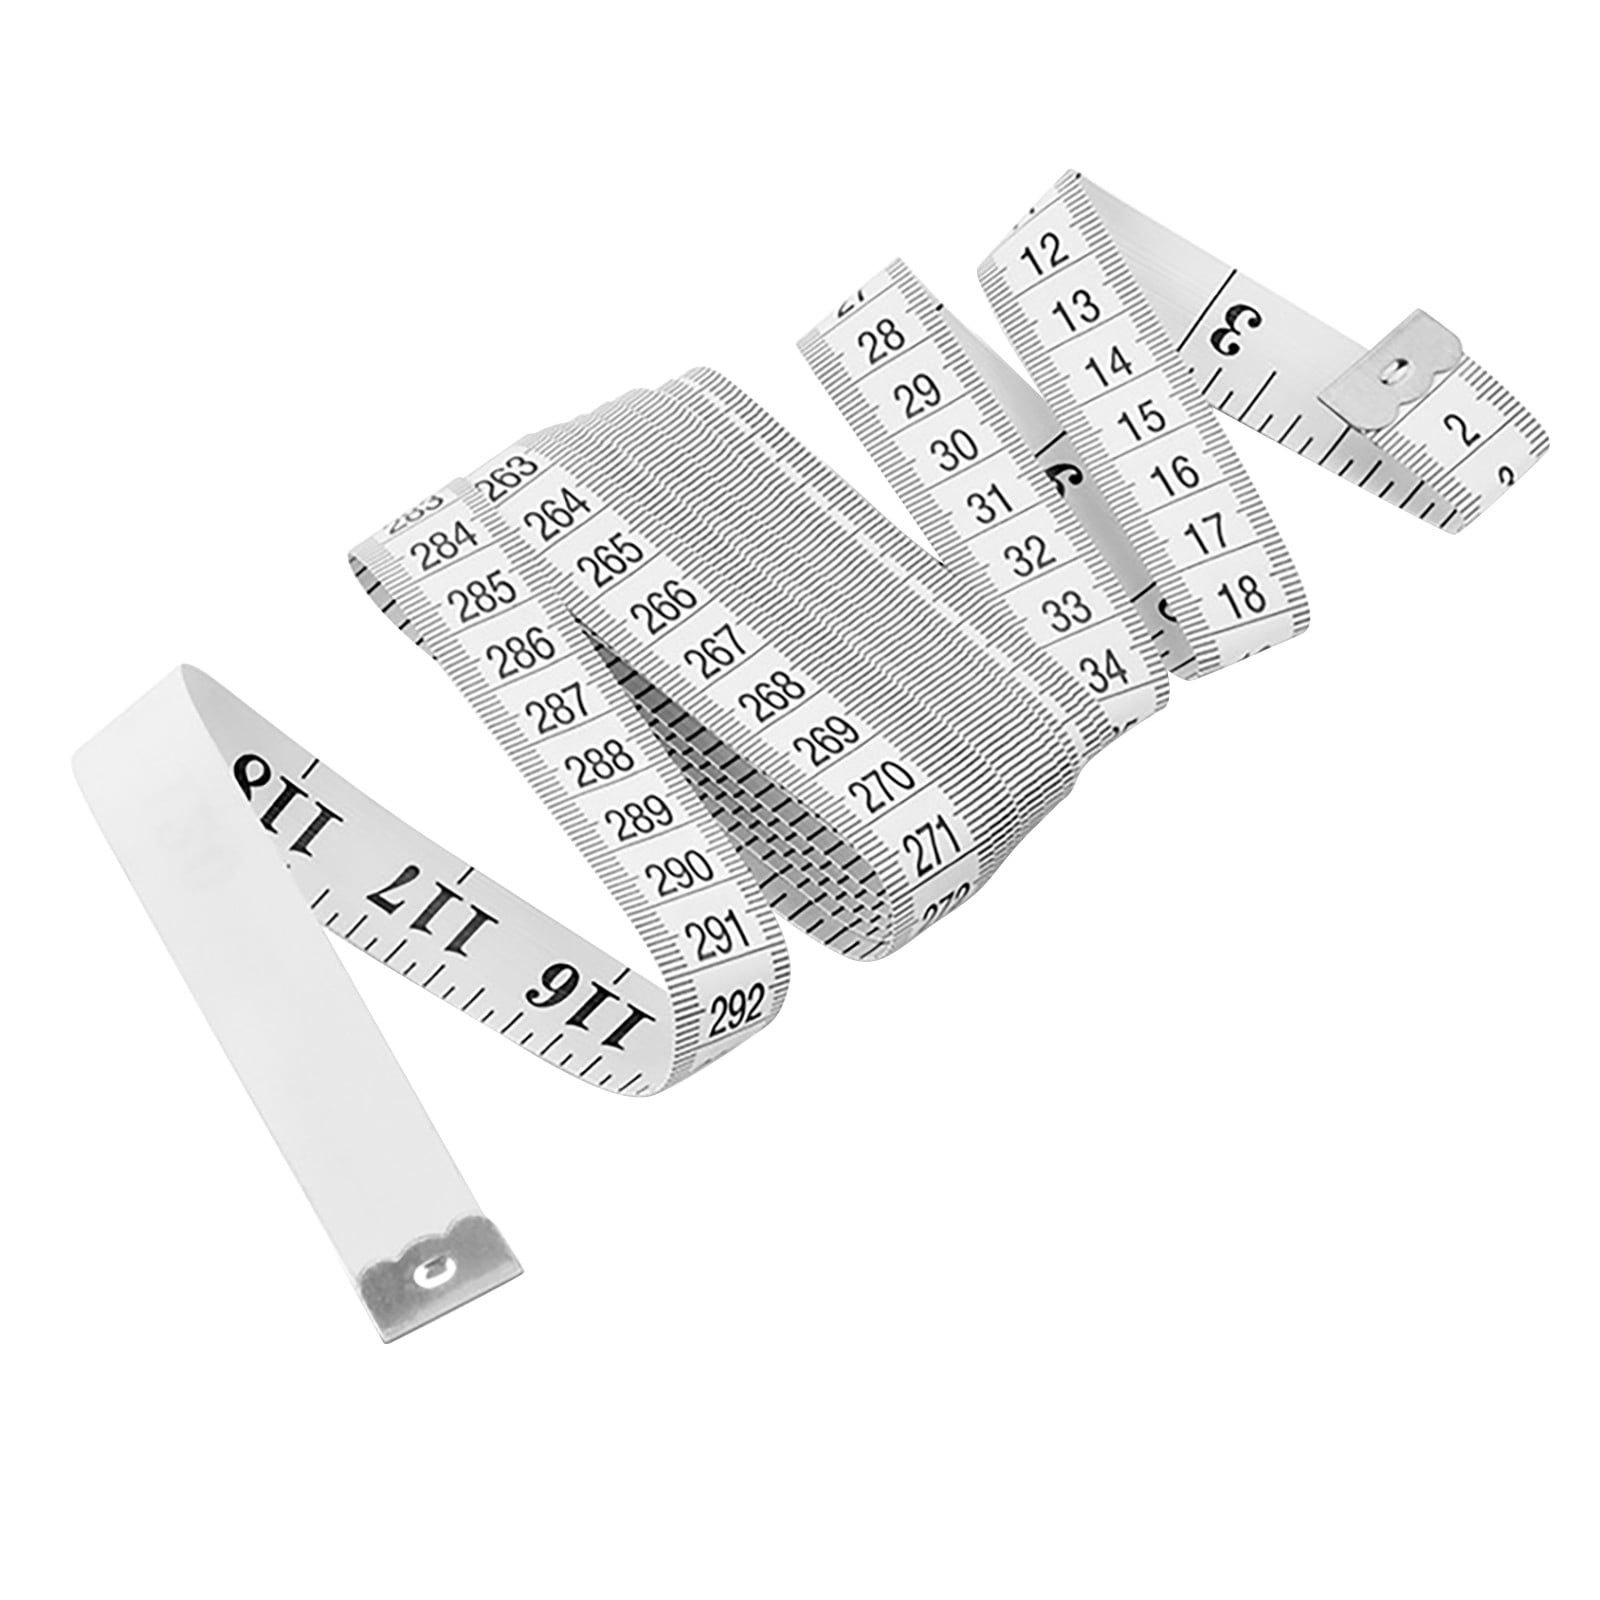 Puiyrbs Cloth Measuring Tape for Body Measurements DIY Tailors Clothing Measuring Tape inch Cloth Ruler Soft Tape 120 inch/300CM, White